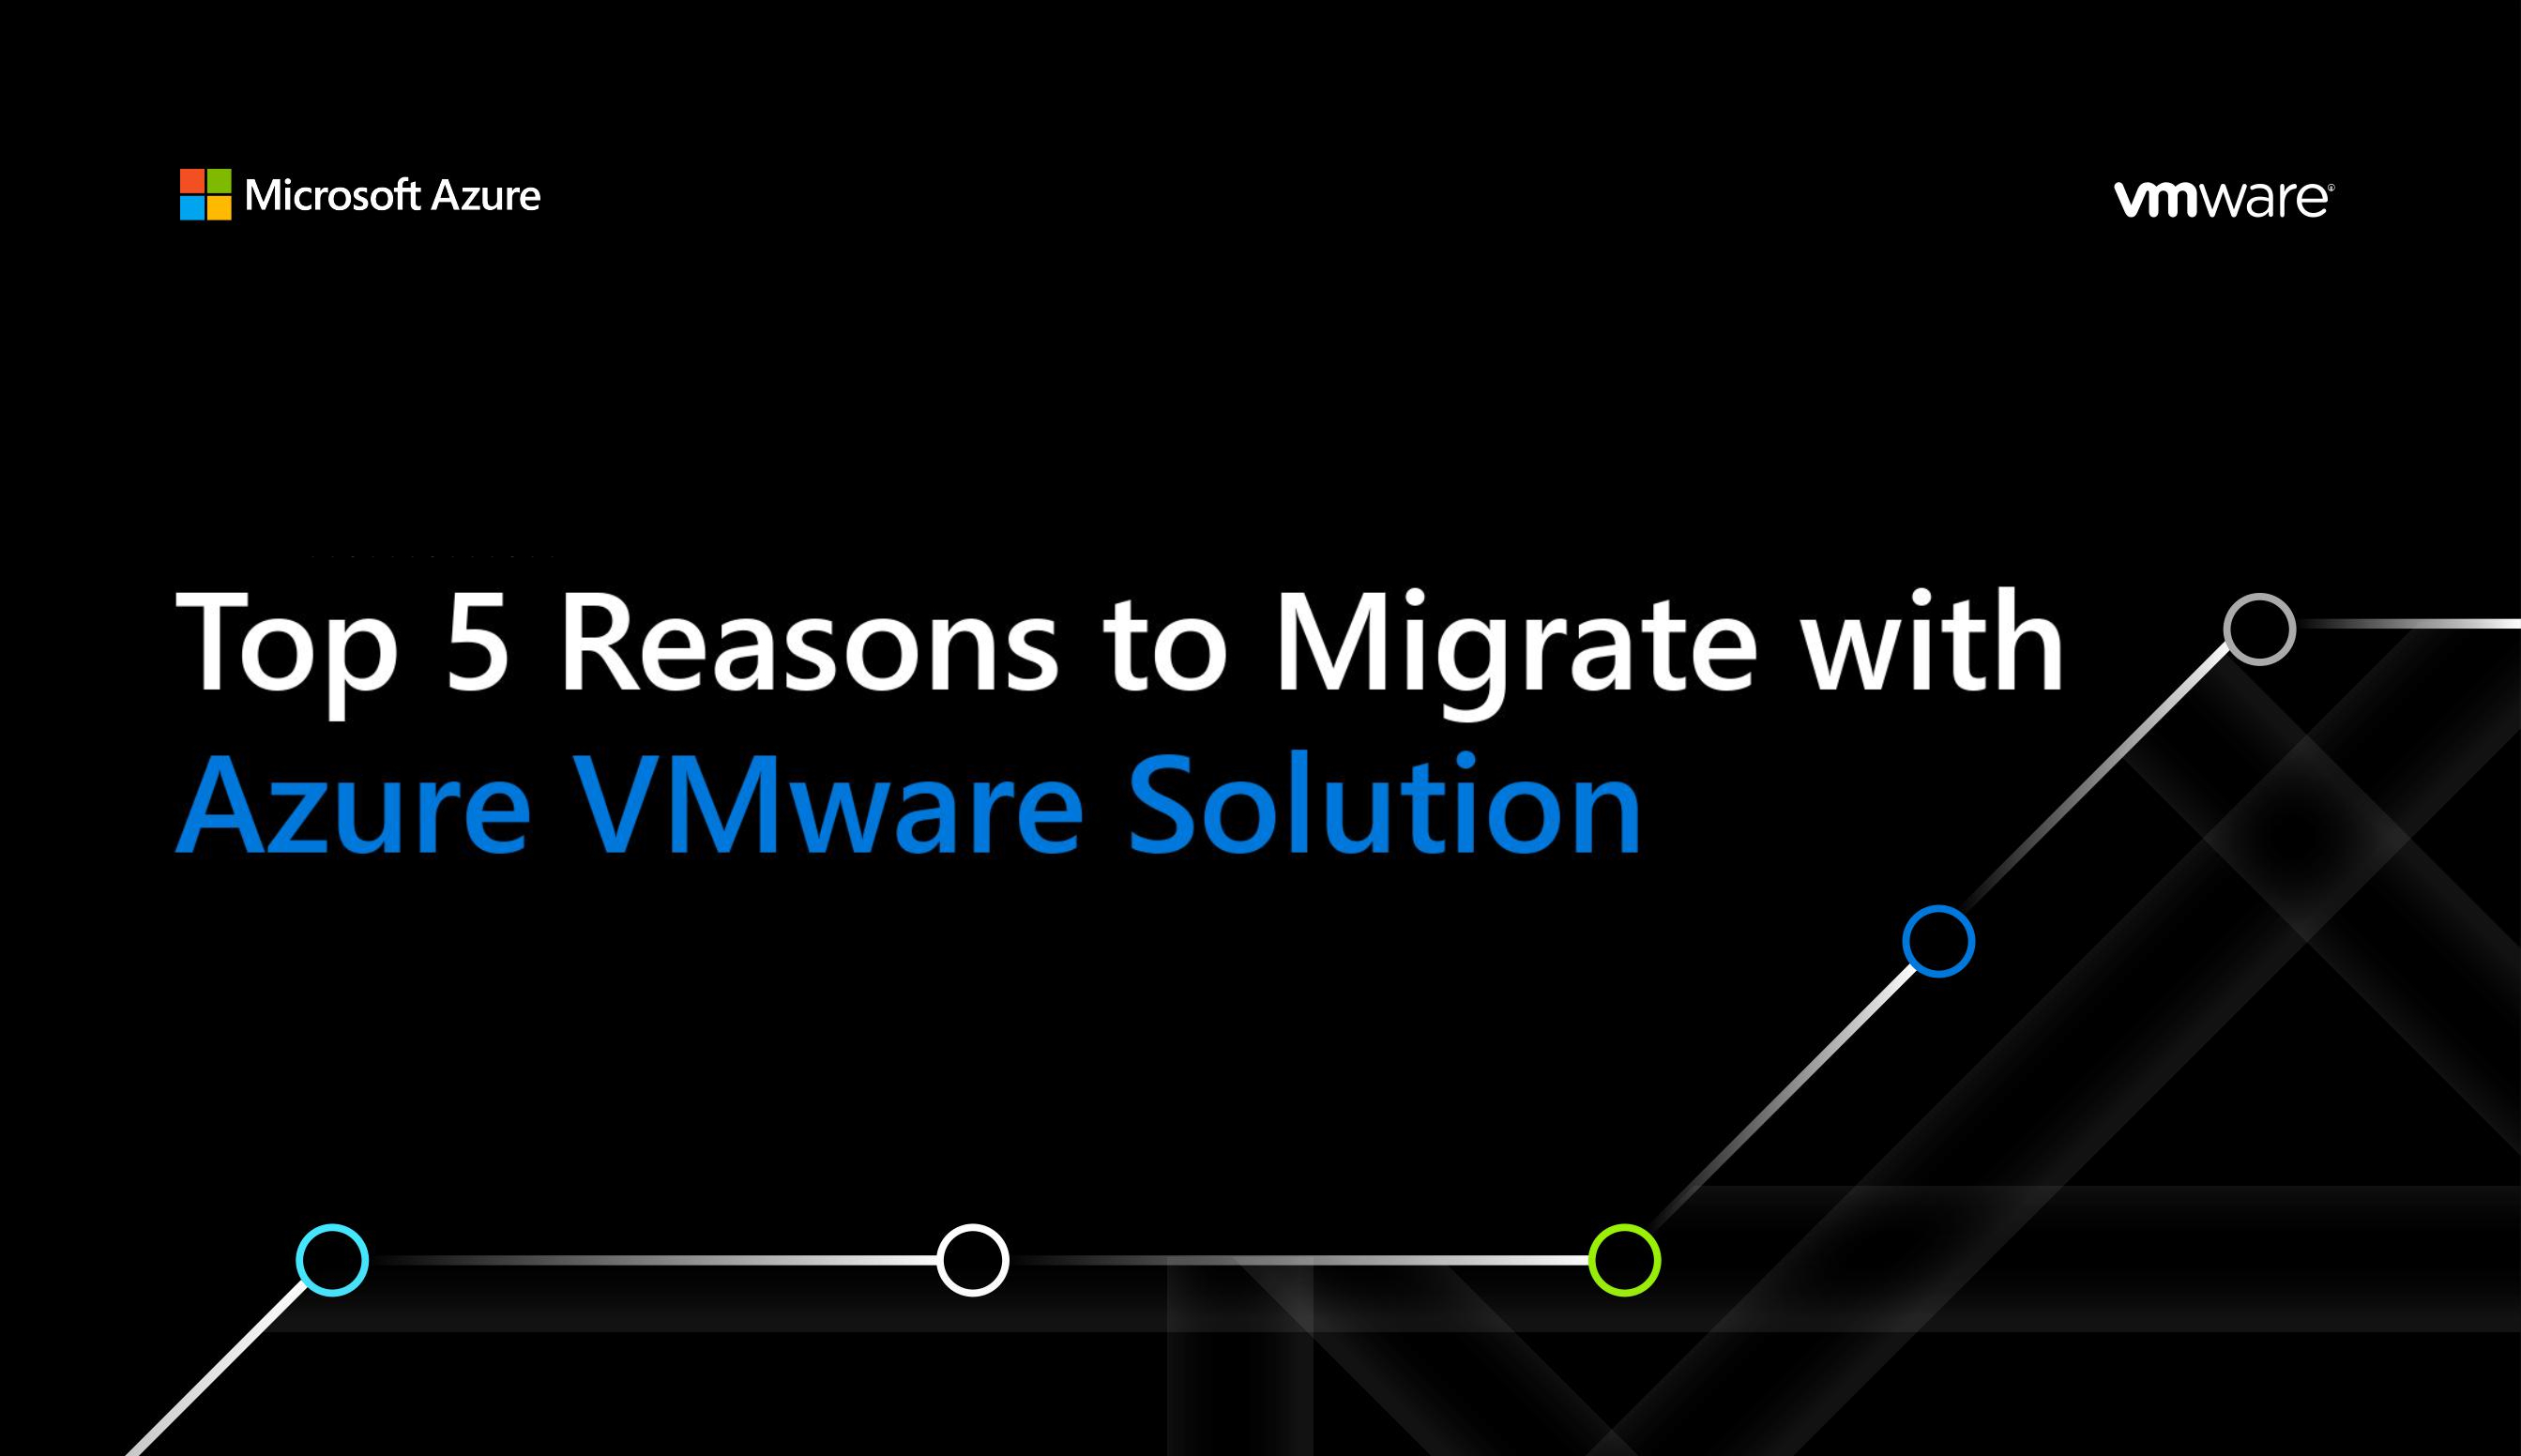 Reasons to migrate to Microsoft Azure